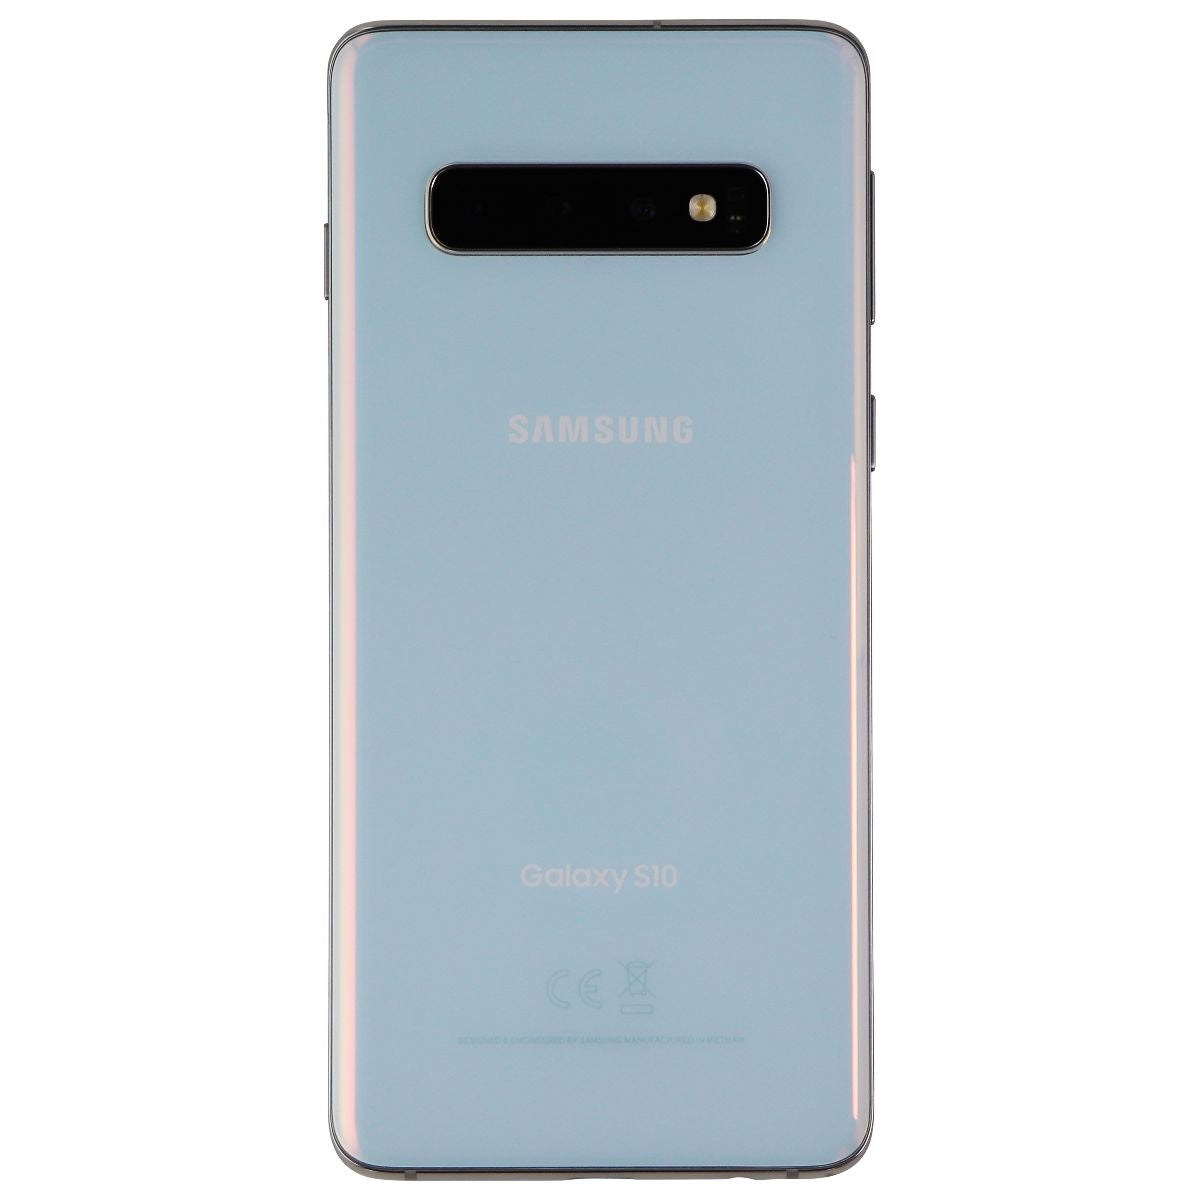 Samsung Galaxy S10 (6.1-in) SM-G973U1 (Unlocked) - 128GB/Prism White Cell Phones & Smartphones Samsung    - Simple Cell Bulk Wholesale Pricing - USA Seller